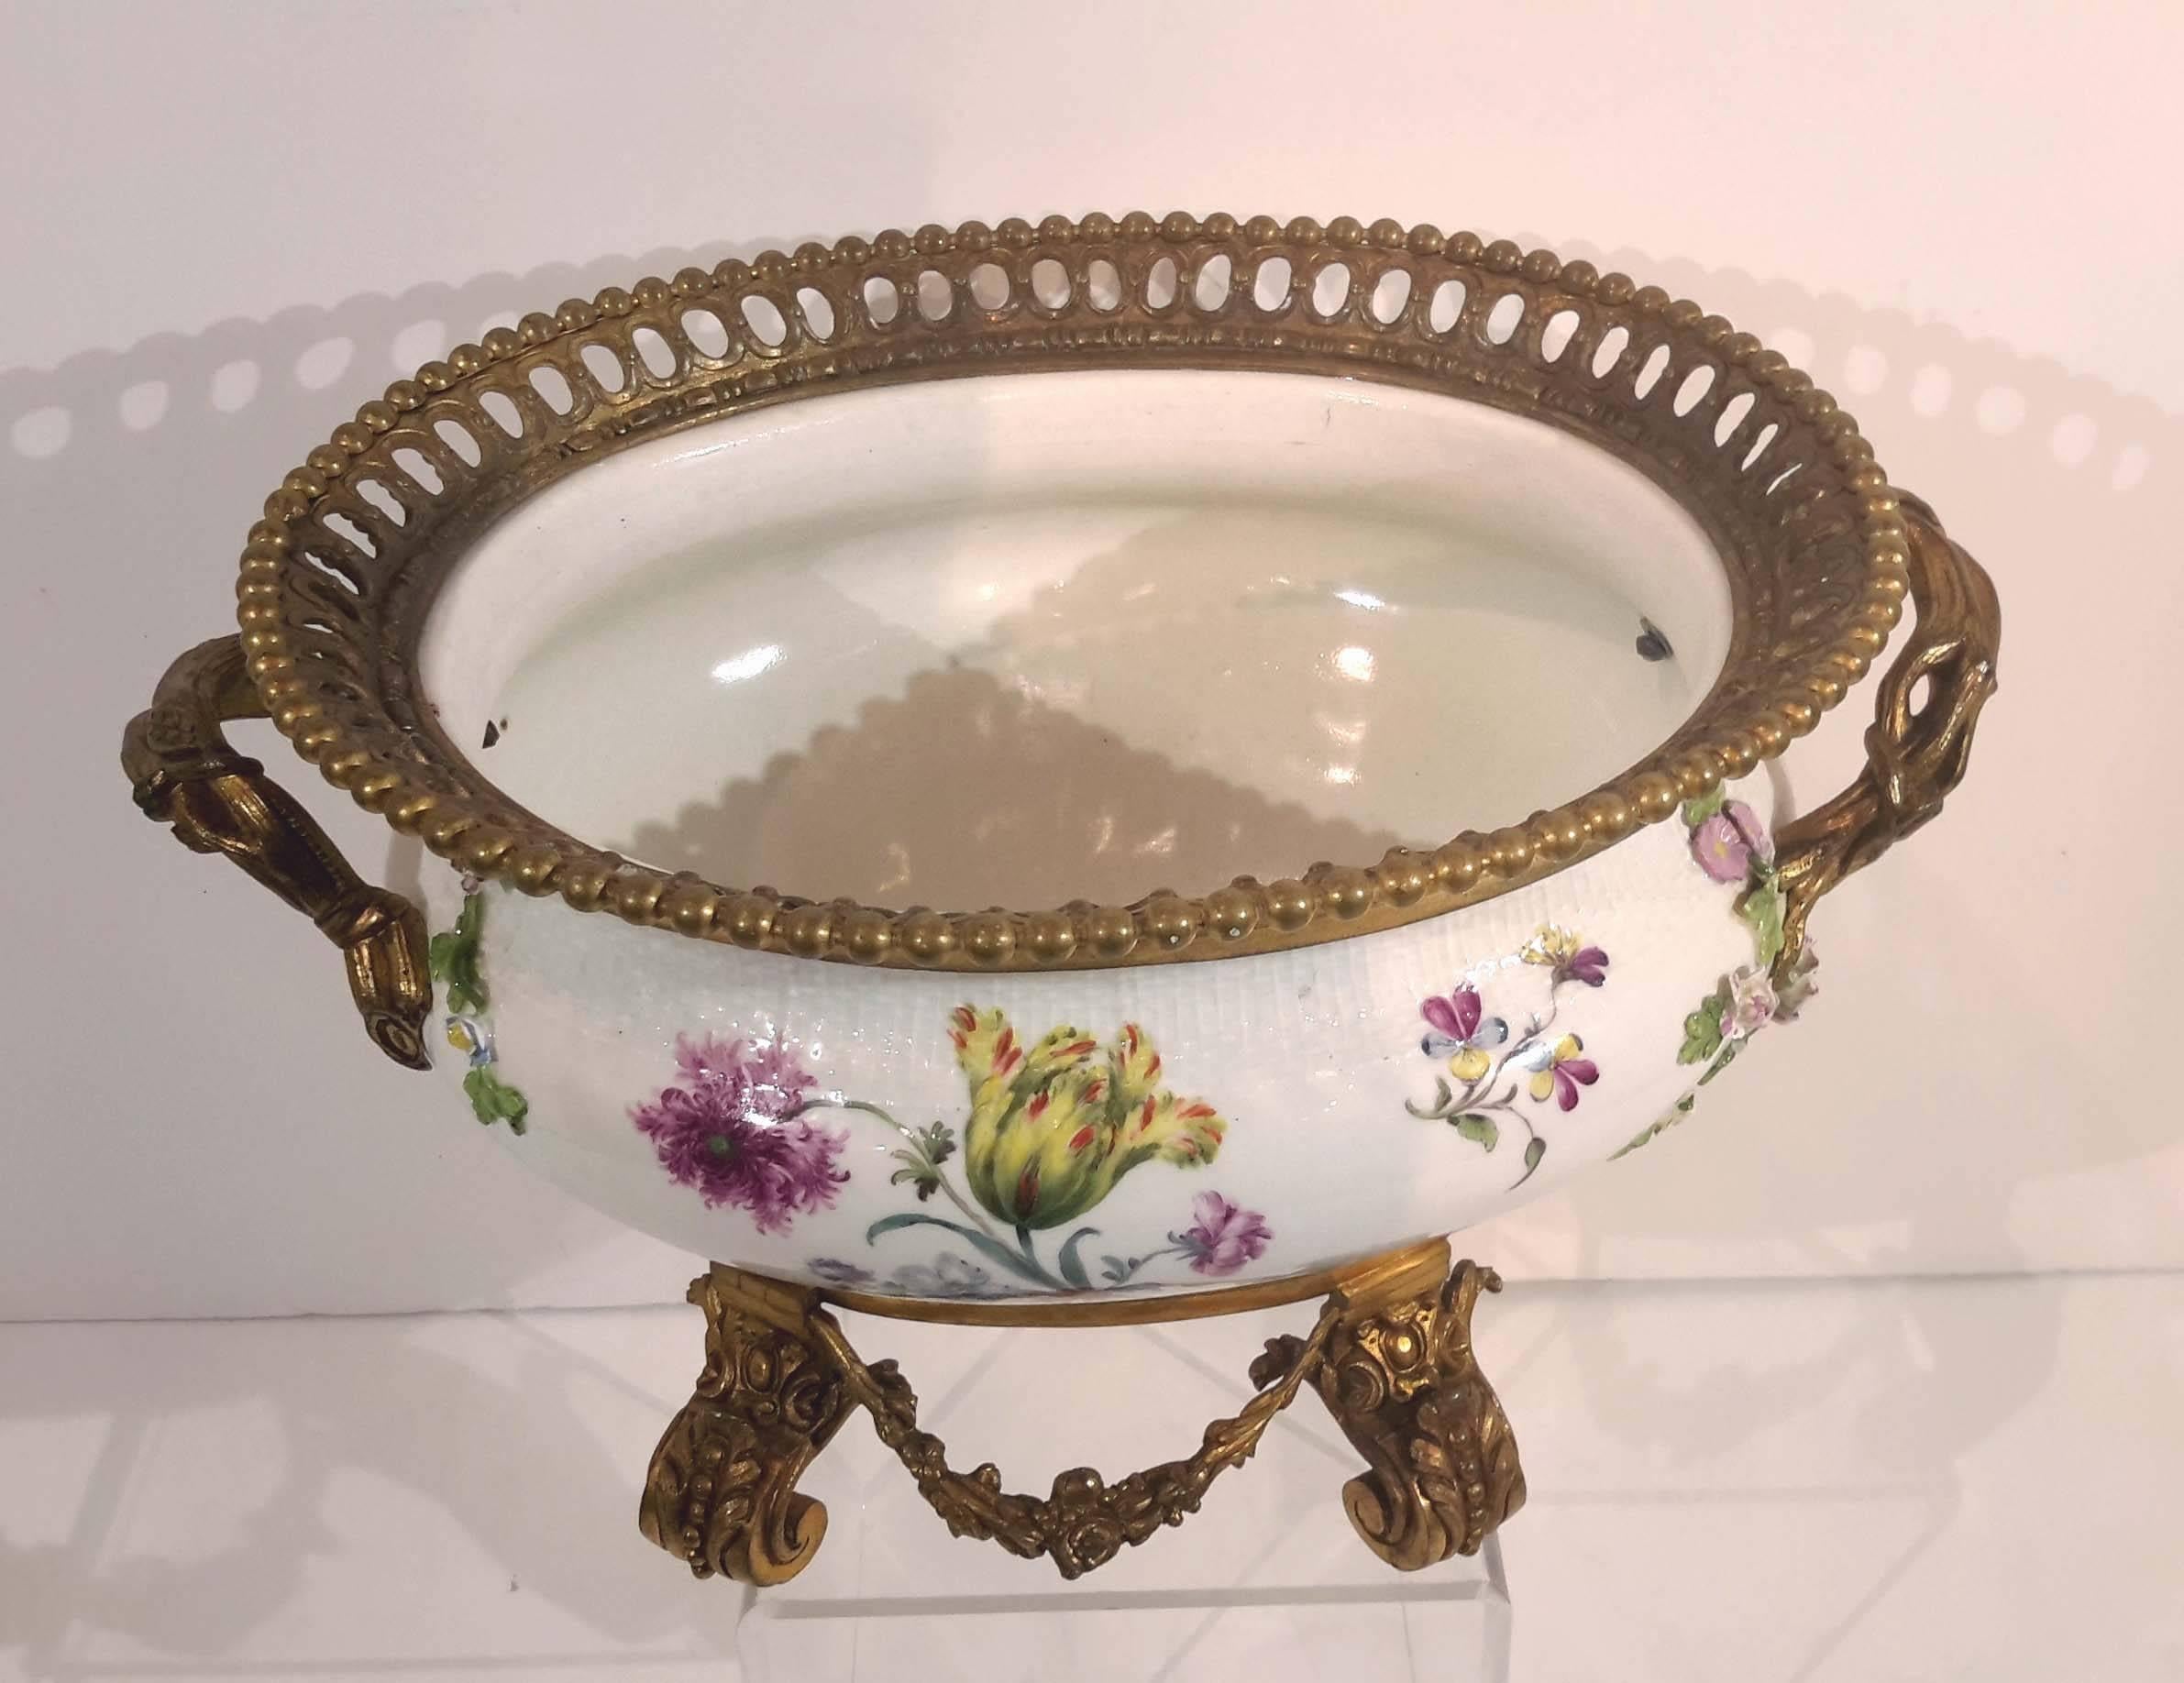 Great hand-painted details Meissen porcelain tureen later mounted in 19th century with gilt bronze mounts.

Early in the 18th century, Augustus the Strong, elector of Saxony, arrested alchemist Johann Friedrich Bottger and imprisoned him in the